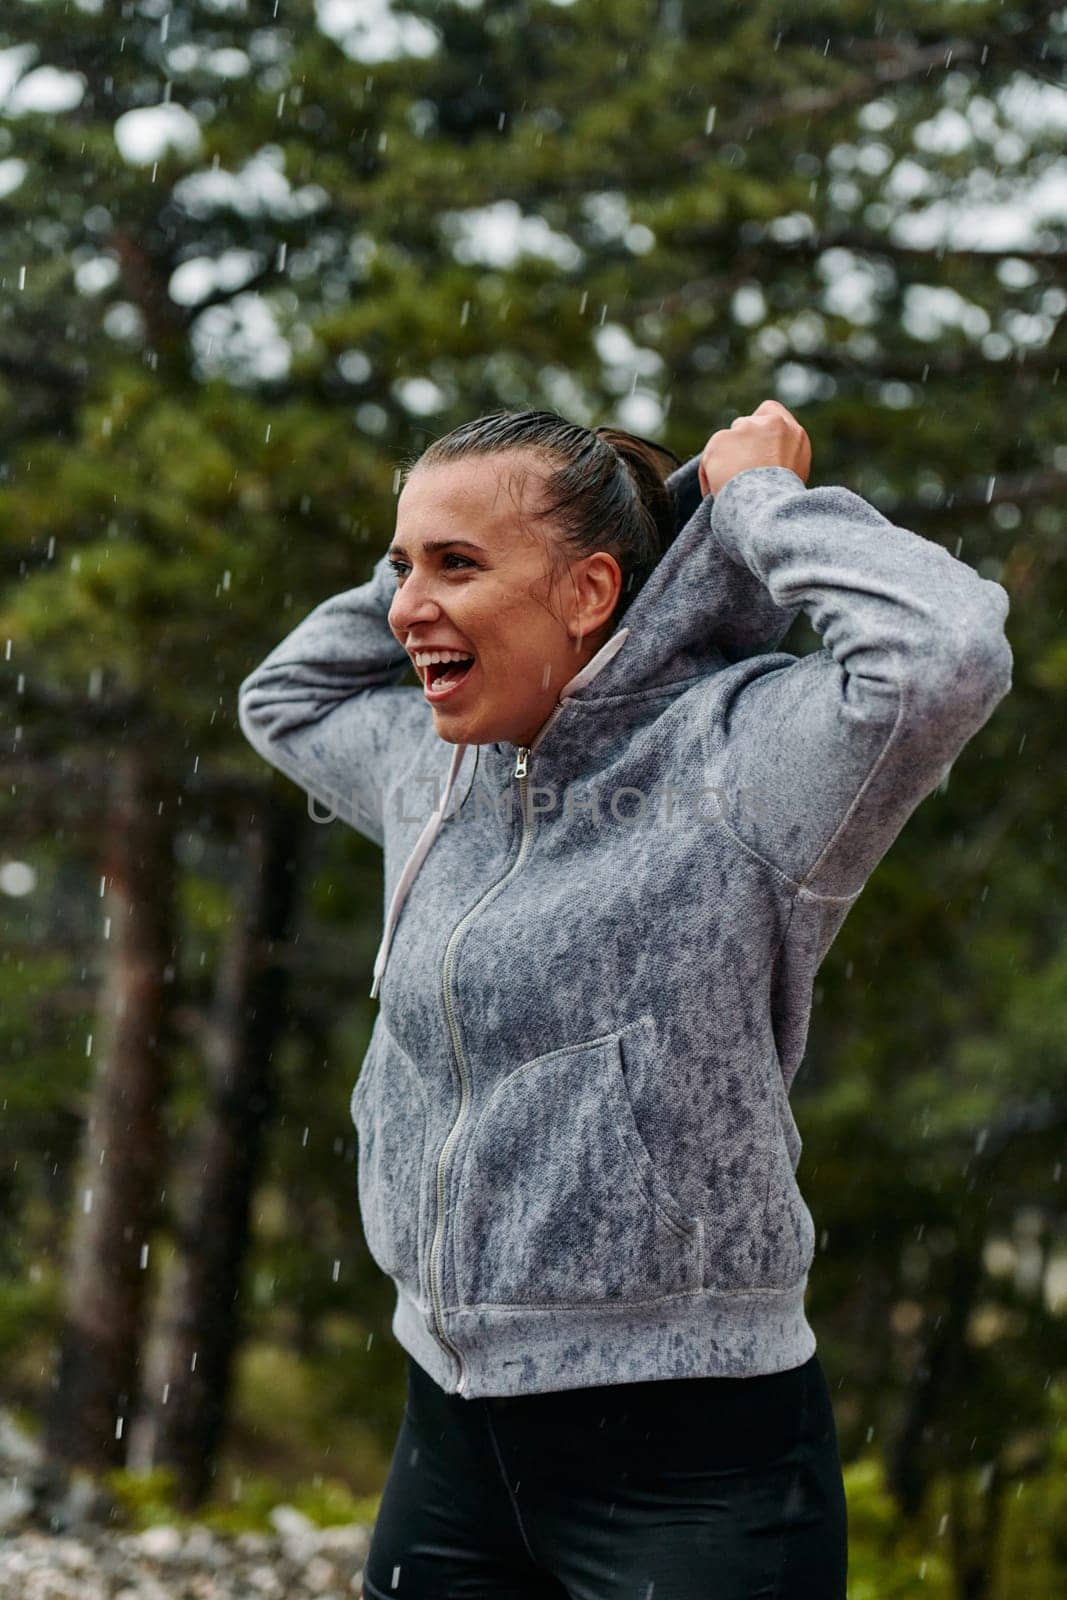 A stunning woman savors the tranquility of a rainy day after a rigorous run, finding solace and rejuvenation in the soothing rhythm of the falling rain.